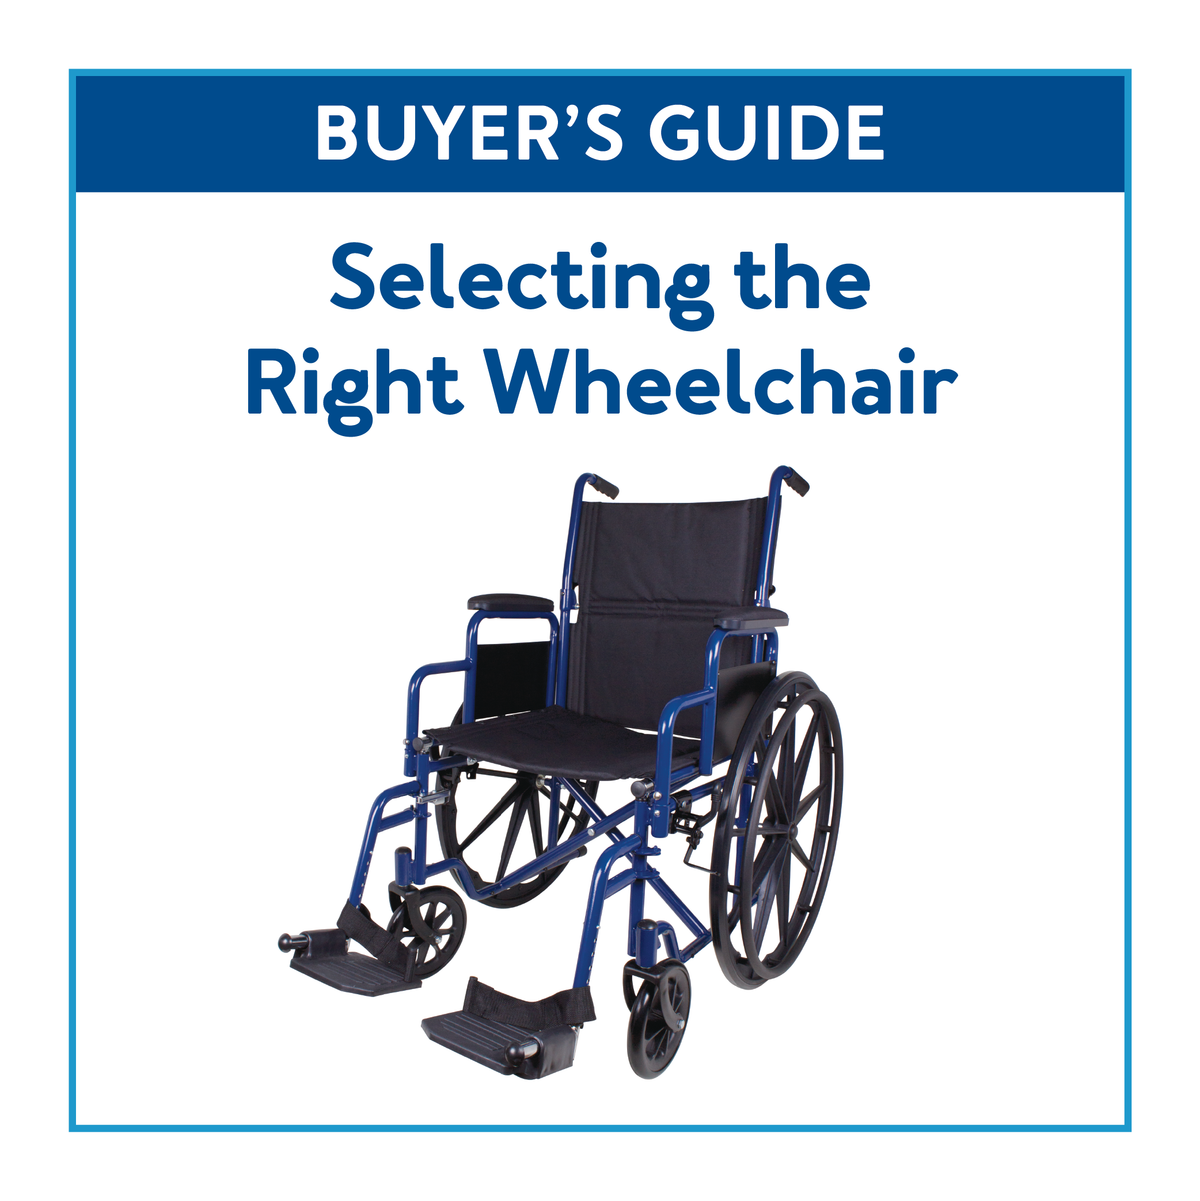 Selecting the right wheelchair